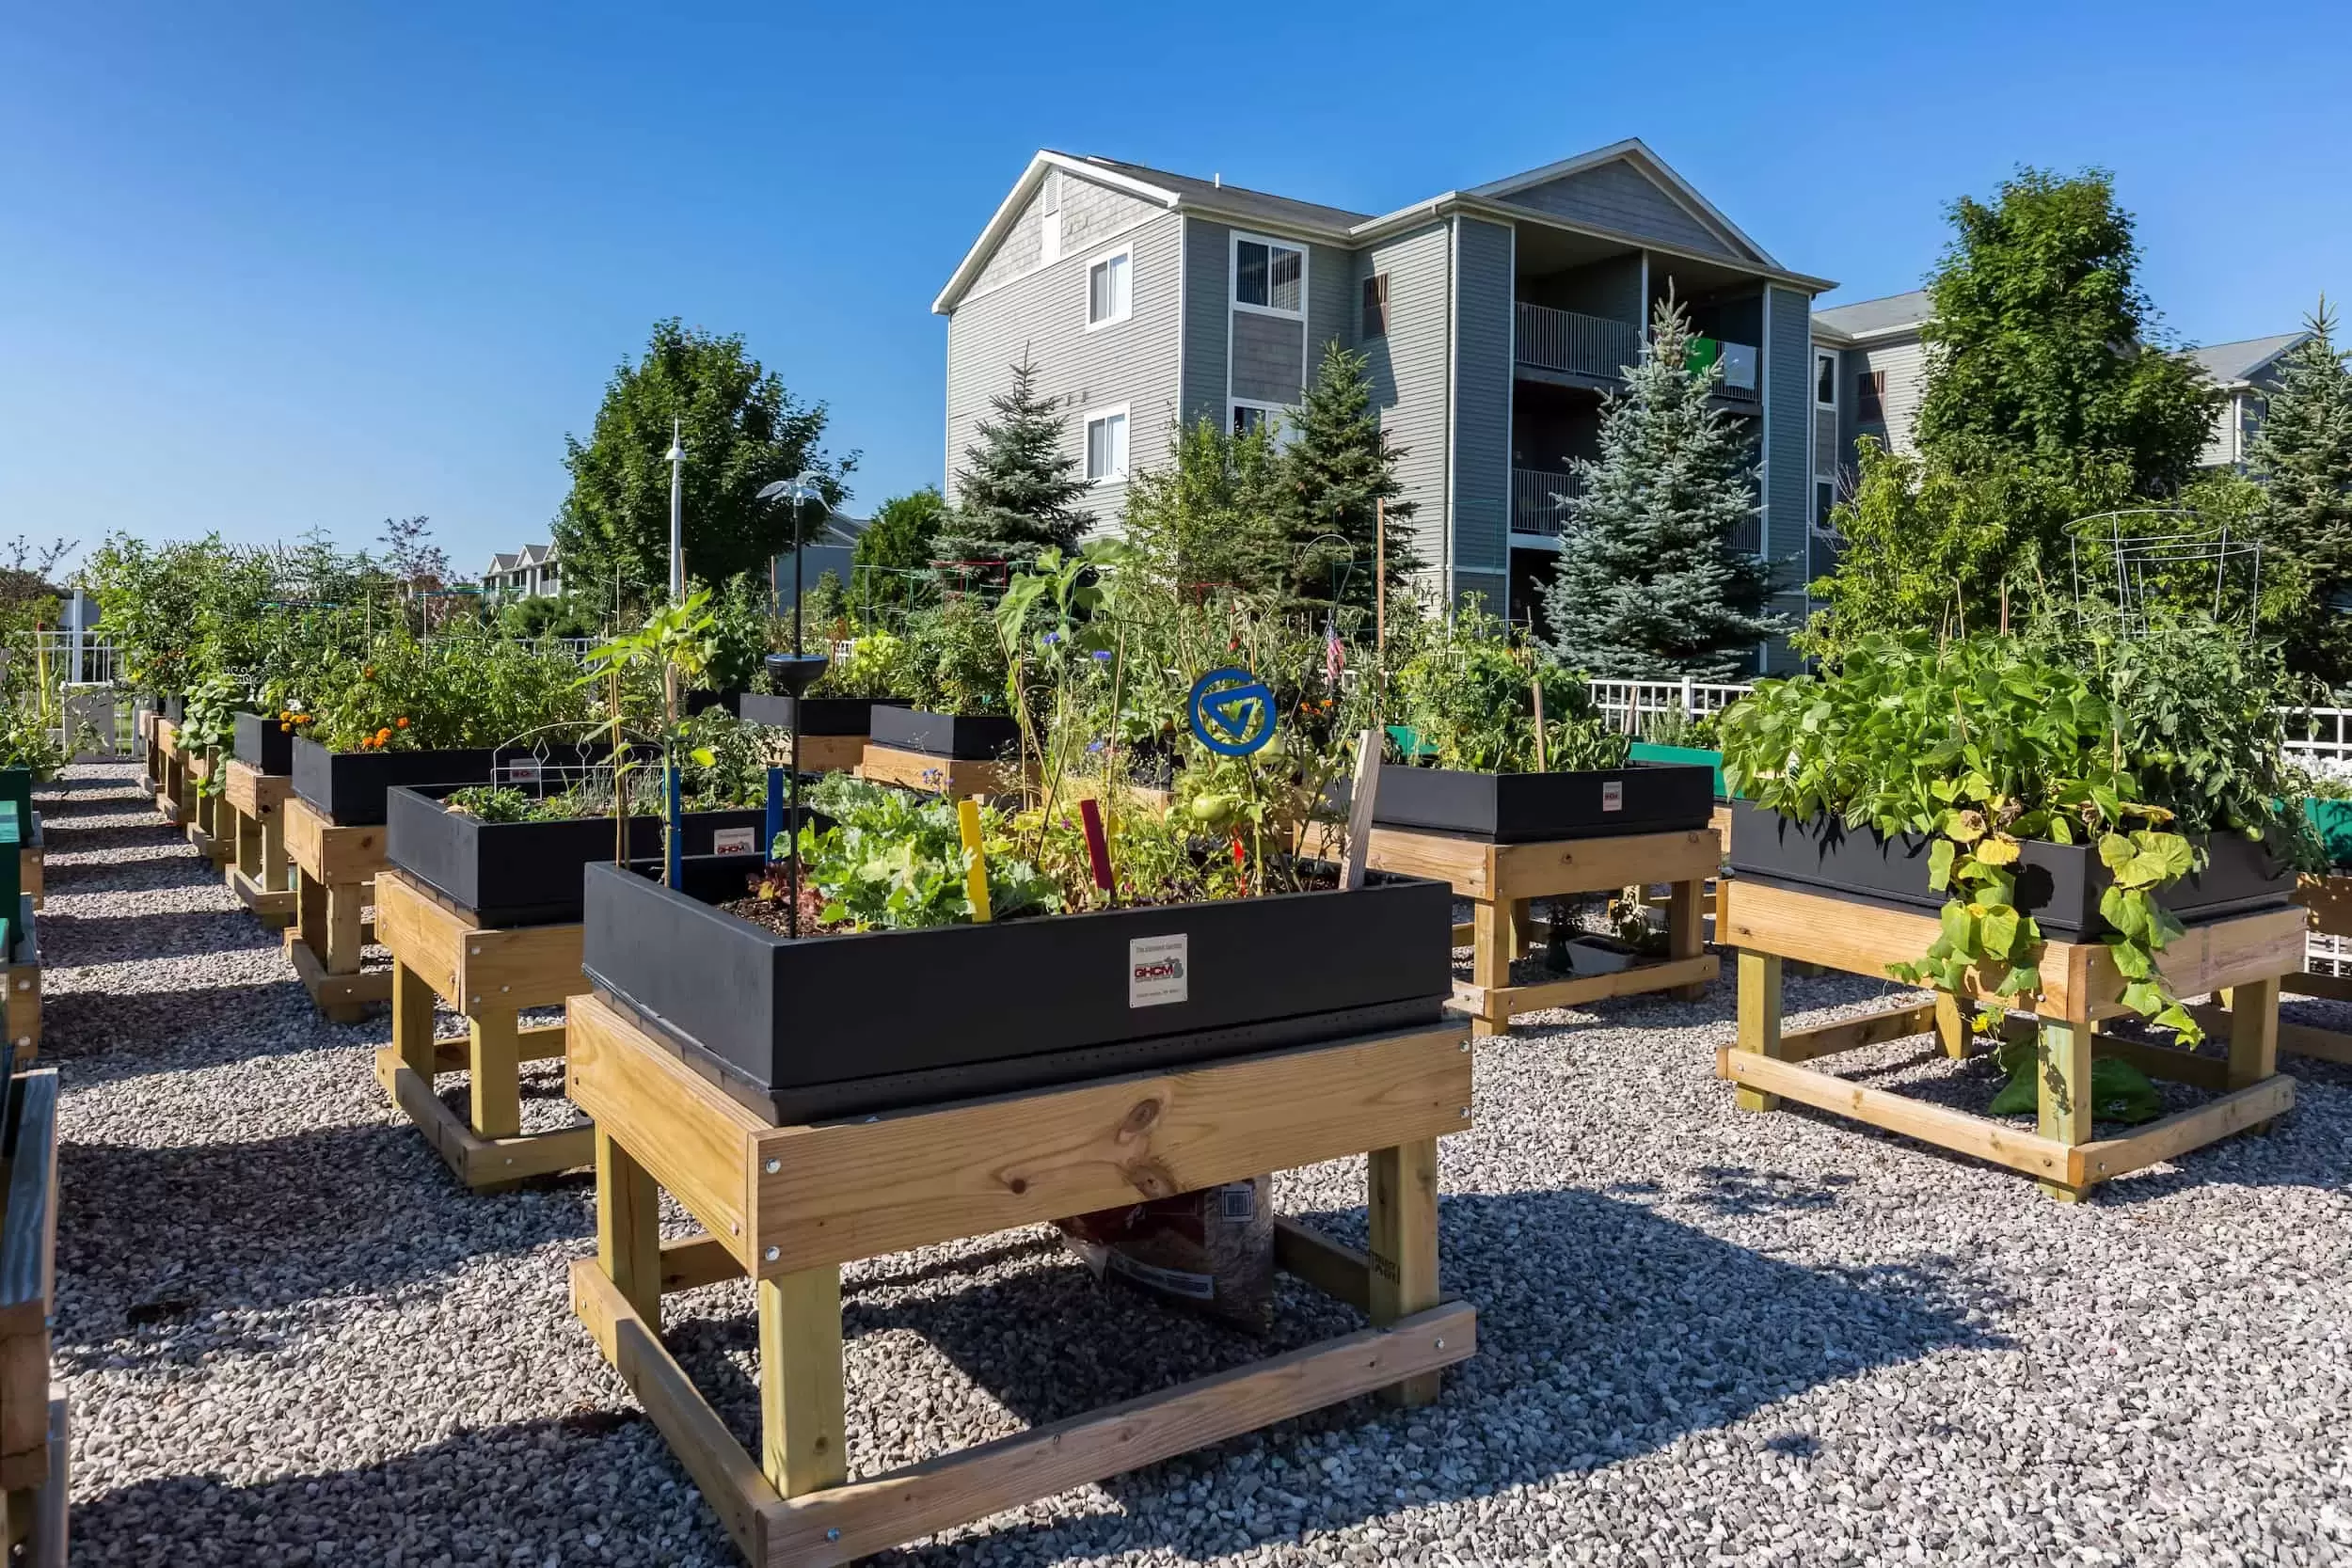 A dozen raised garden beds, each growing a different type of plant.